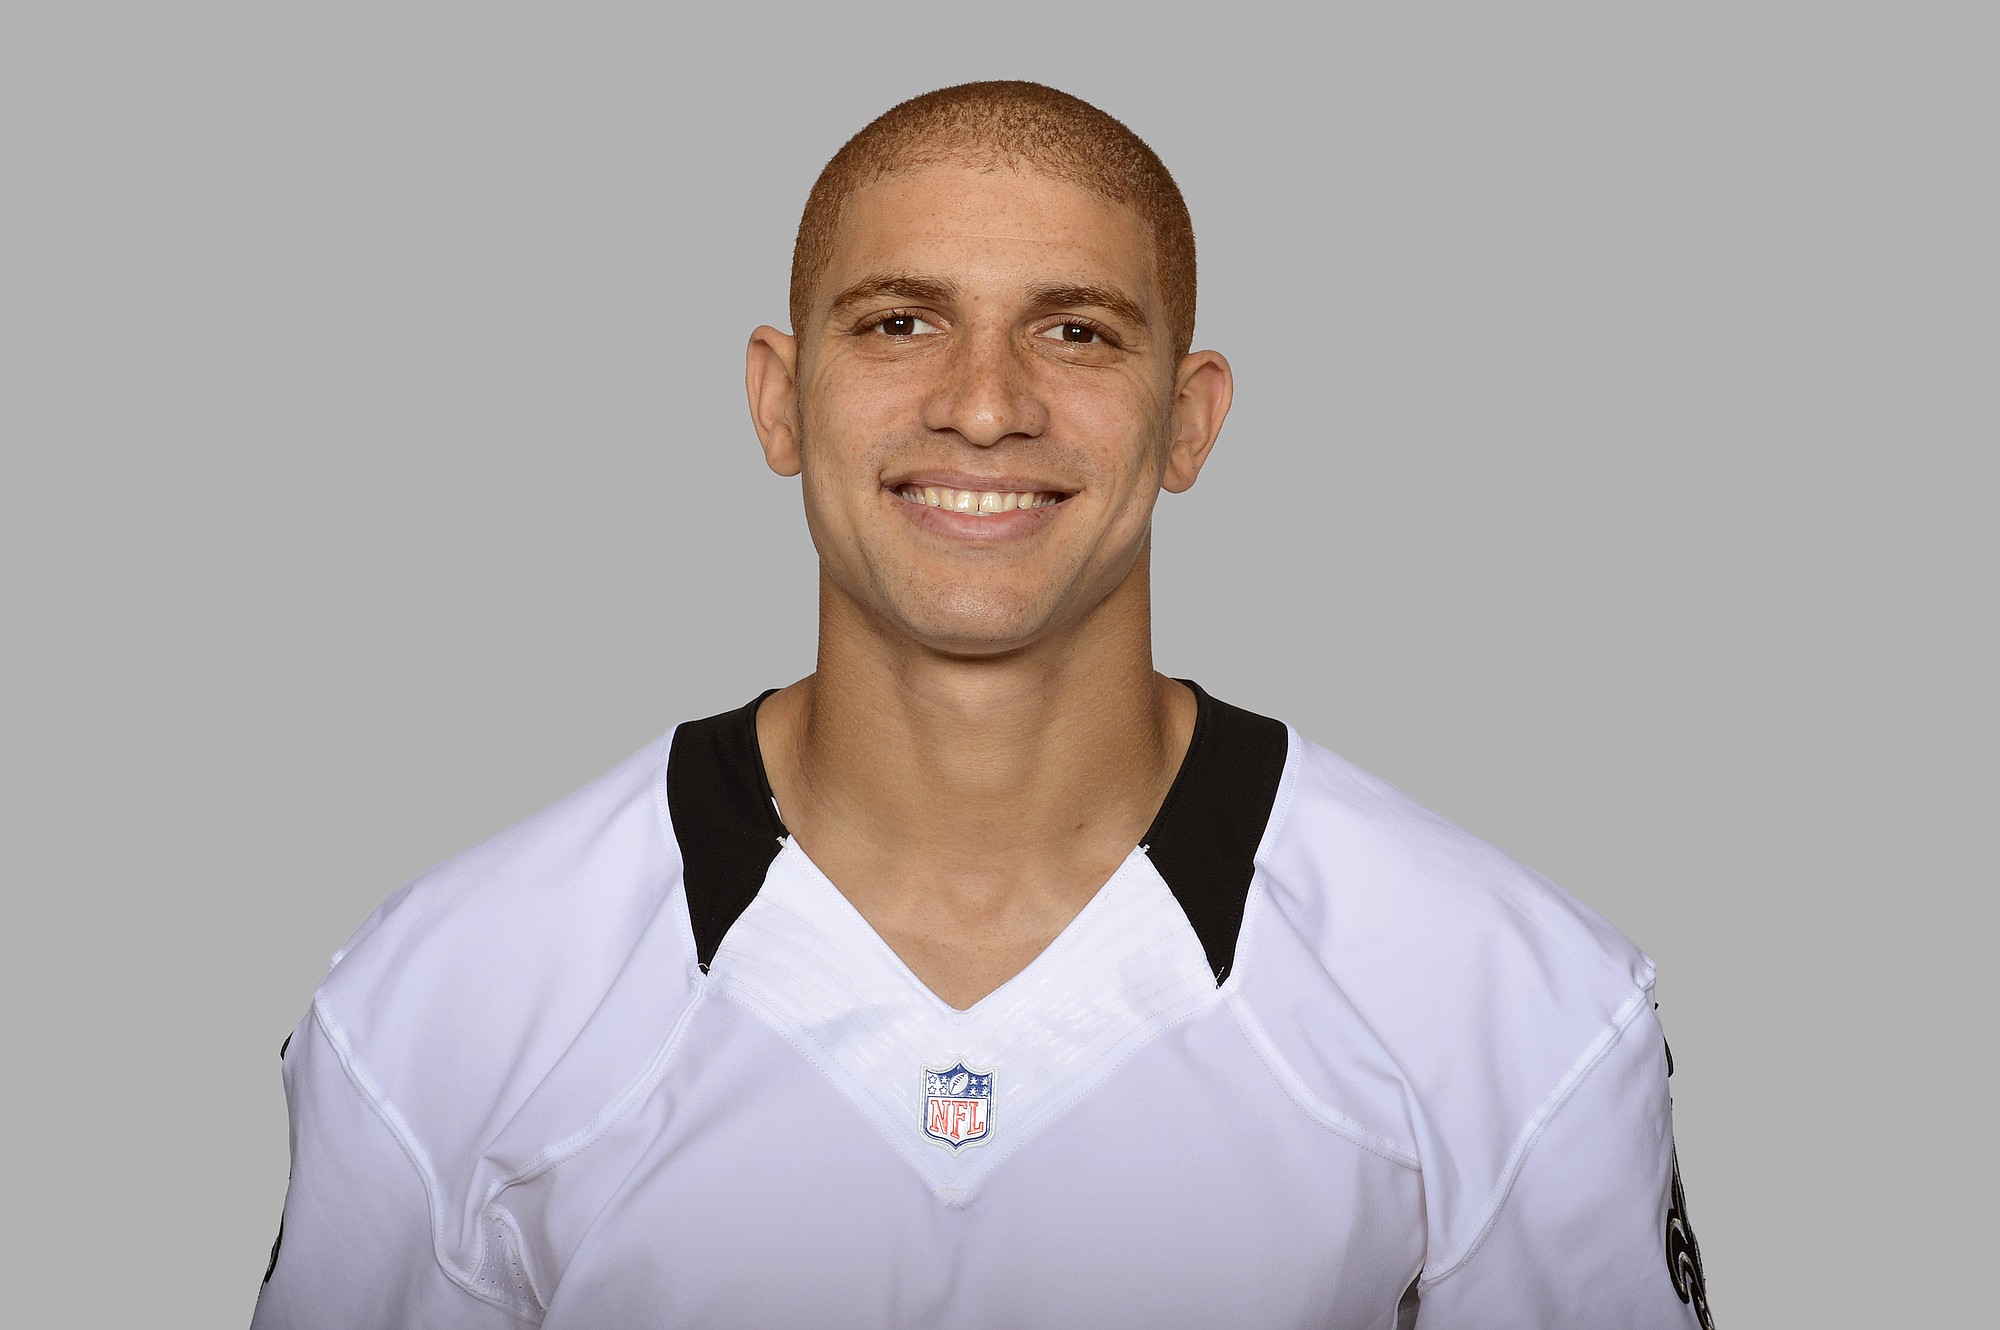 Jimmy Graham, Seahawks tight end